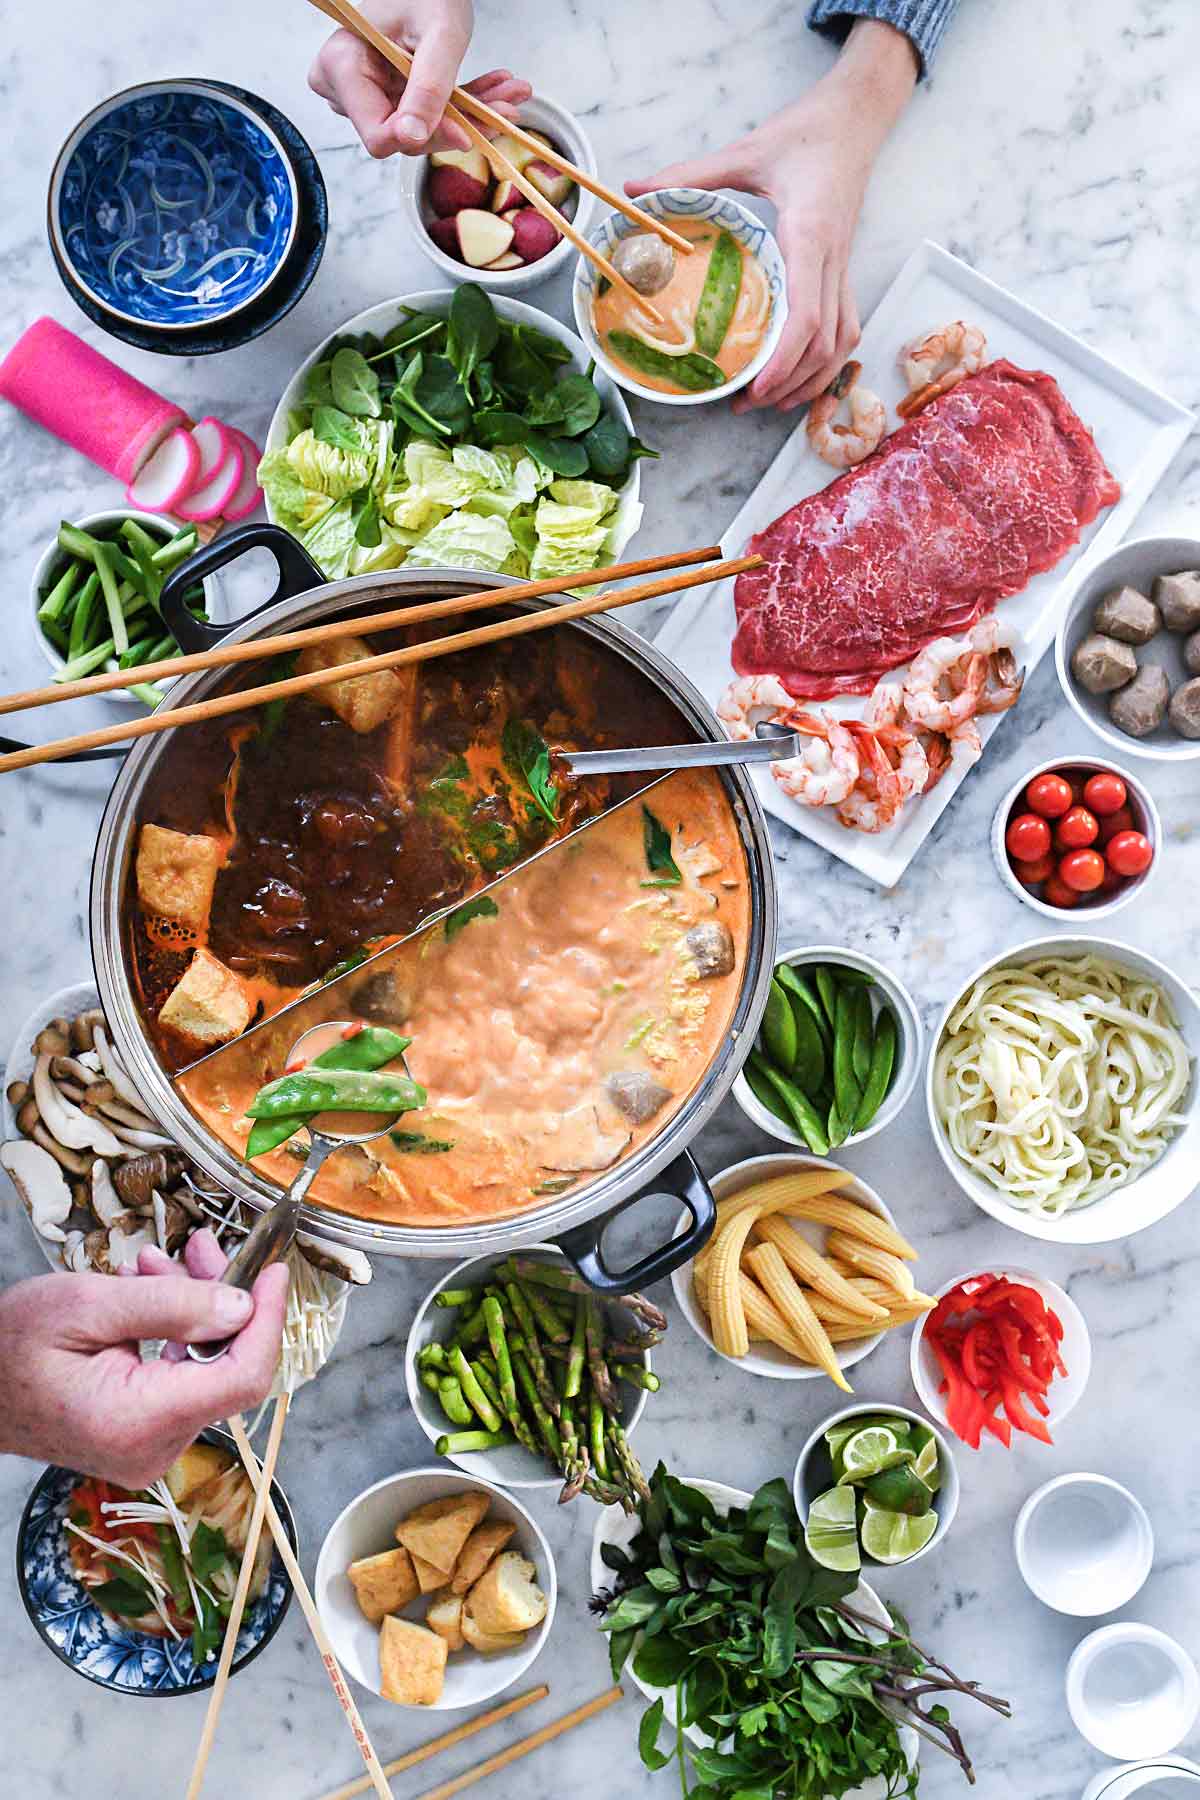 Chinese hot pot - How to make it at home (with spicy and herbal broth )